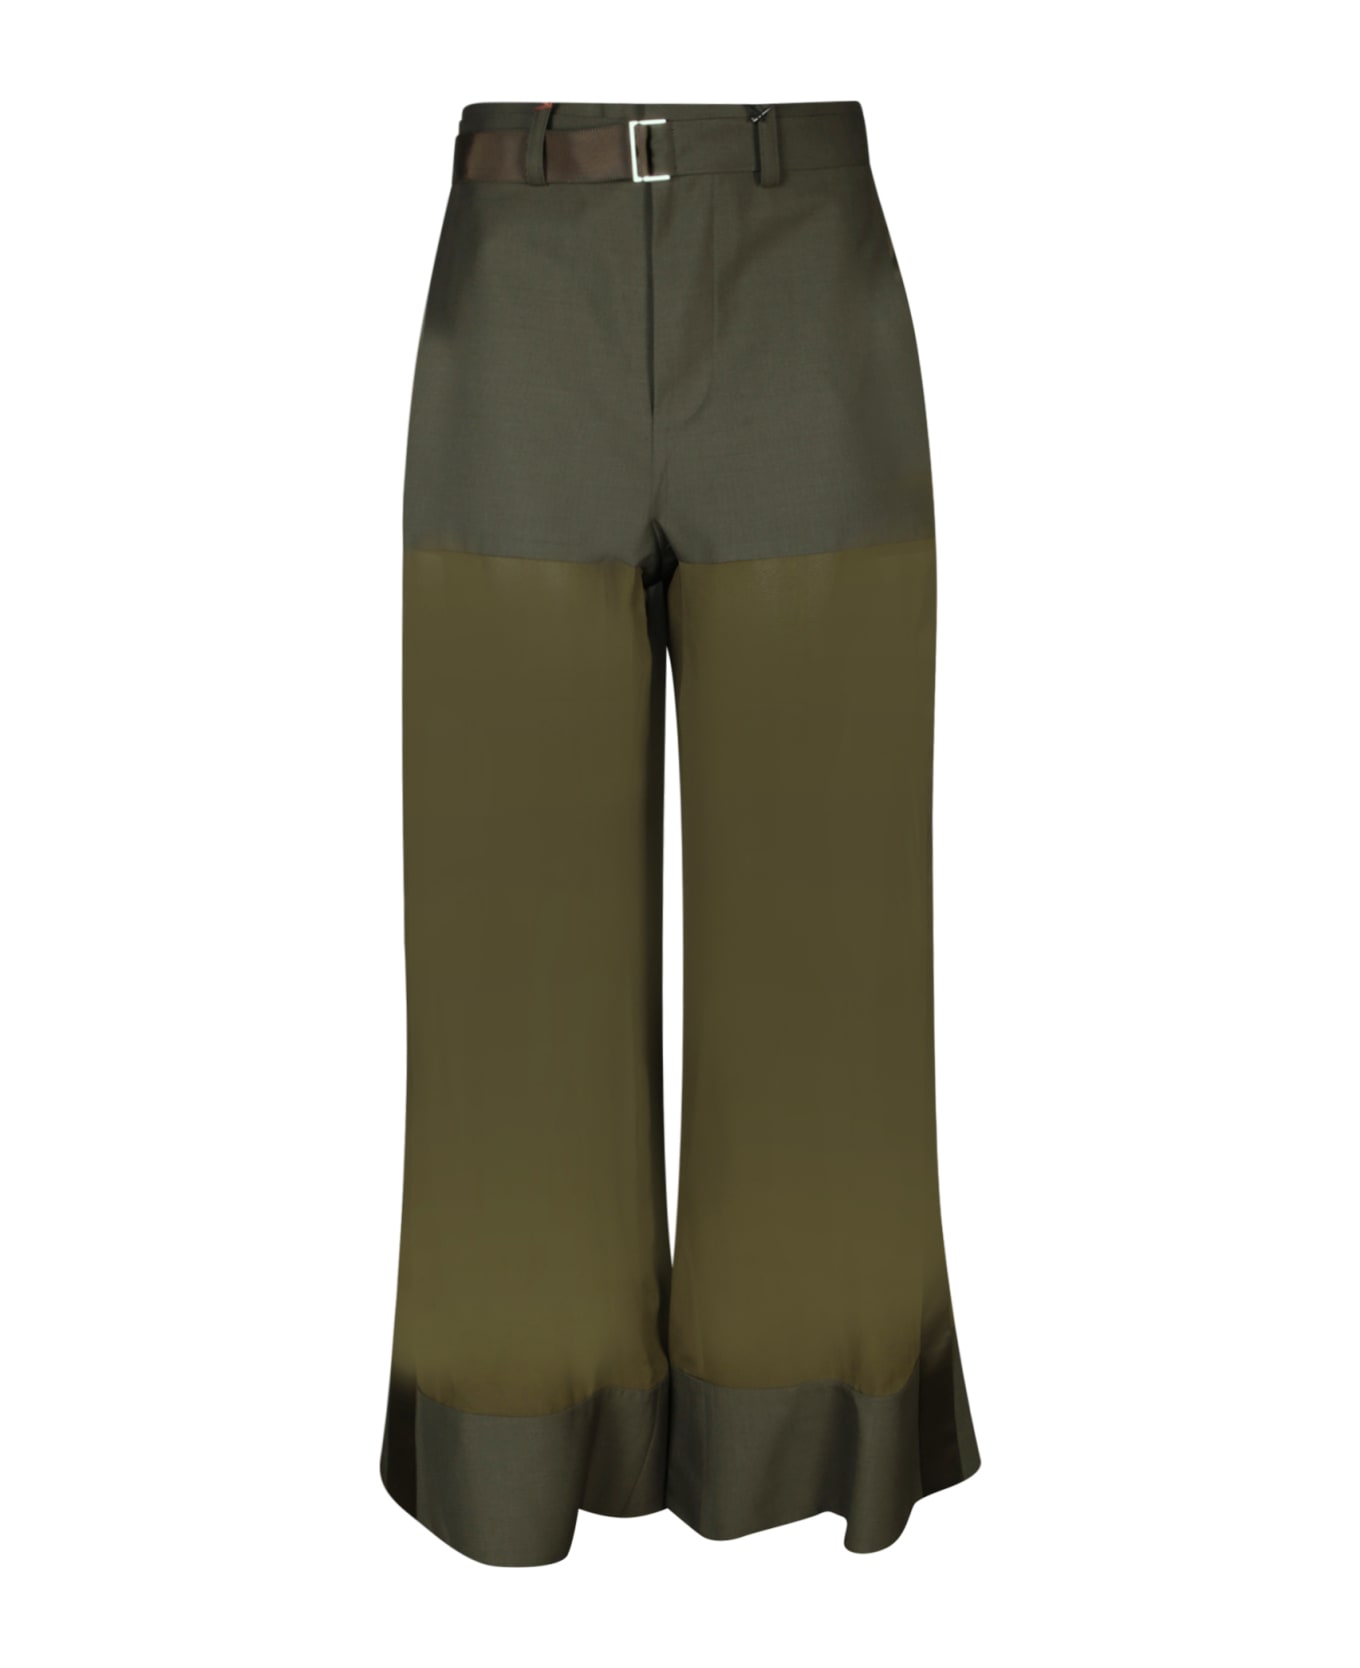 Sacai Suited Mix Khaki Trousers - Green ボトムス